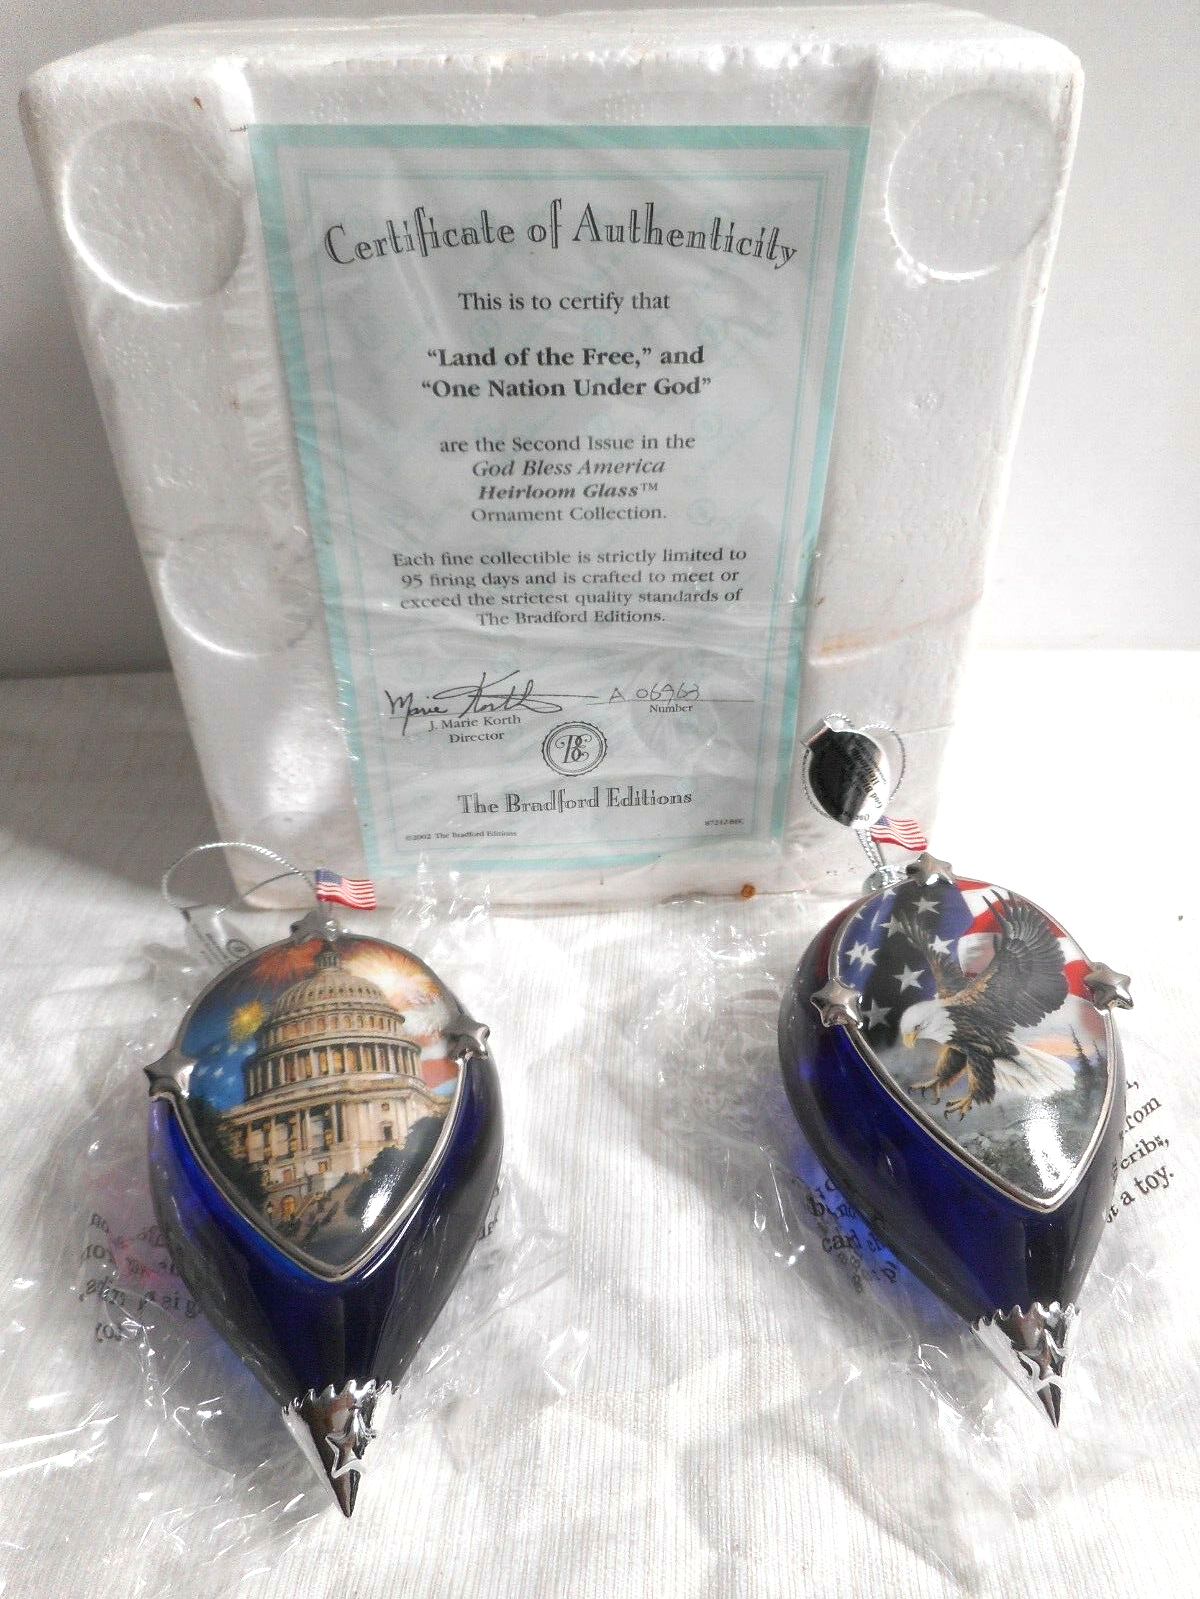 BRADFORD EDITIONS SECOND ISSUE GOD BLESS AMERICA LIQUID FILLED 2 GLASS ORNAMENTS - $33.99